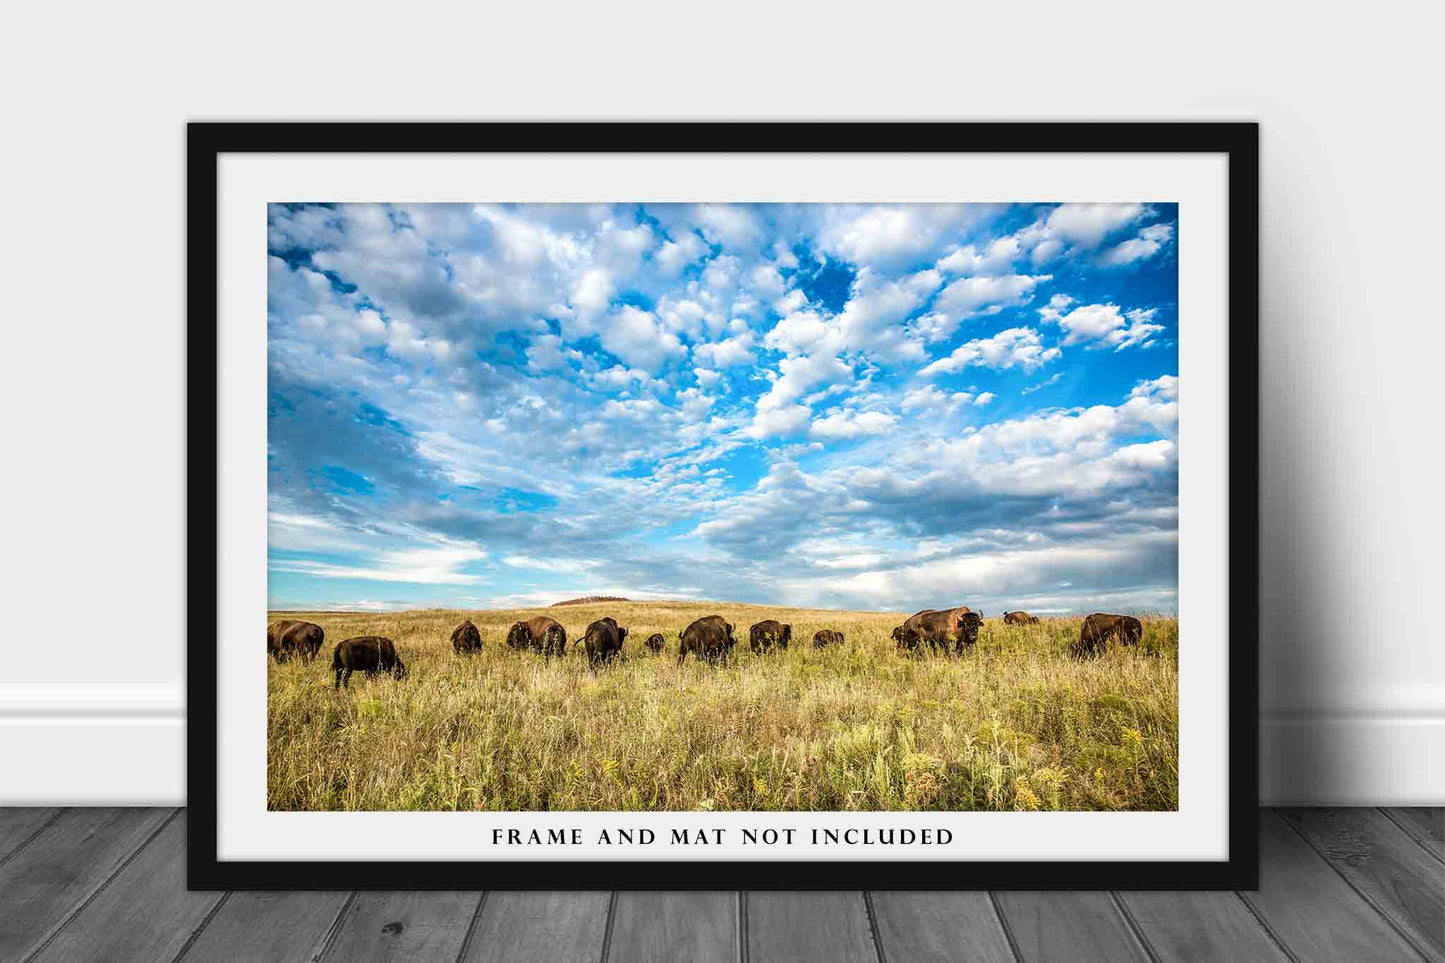 Bison Photography Print (Not Framed) Picture of Buffalo Herd on Tallgrass Prairie in Oklahoma Great Plains Wall Art Western Decor